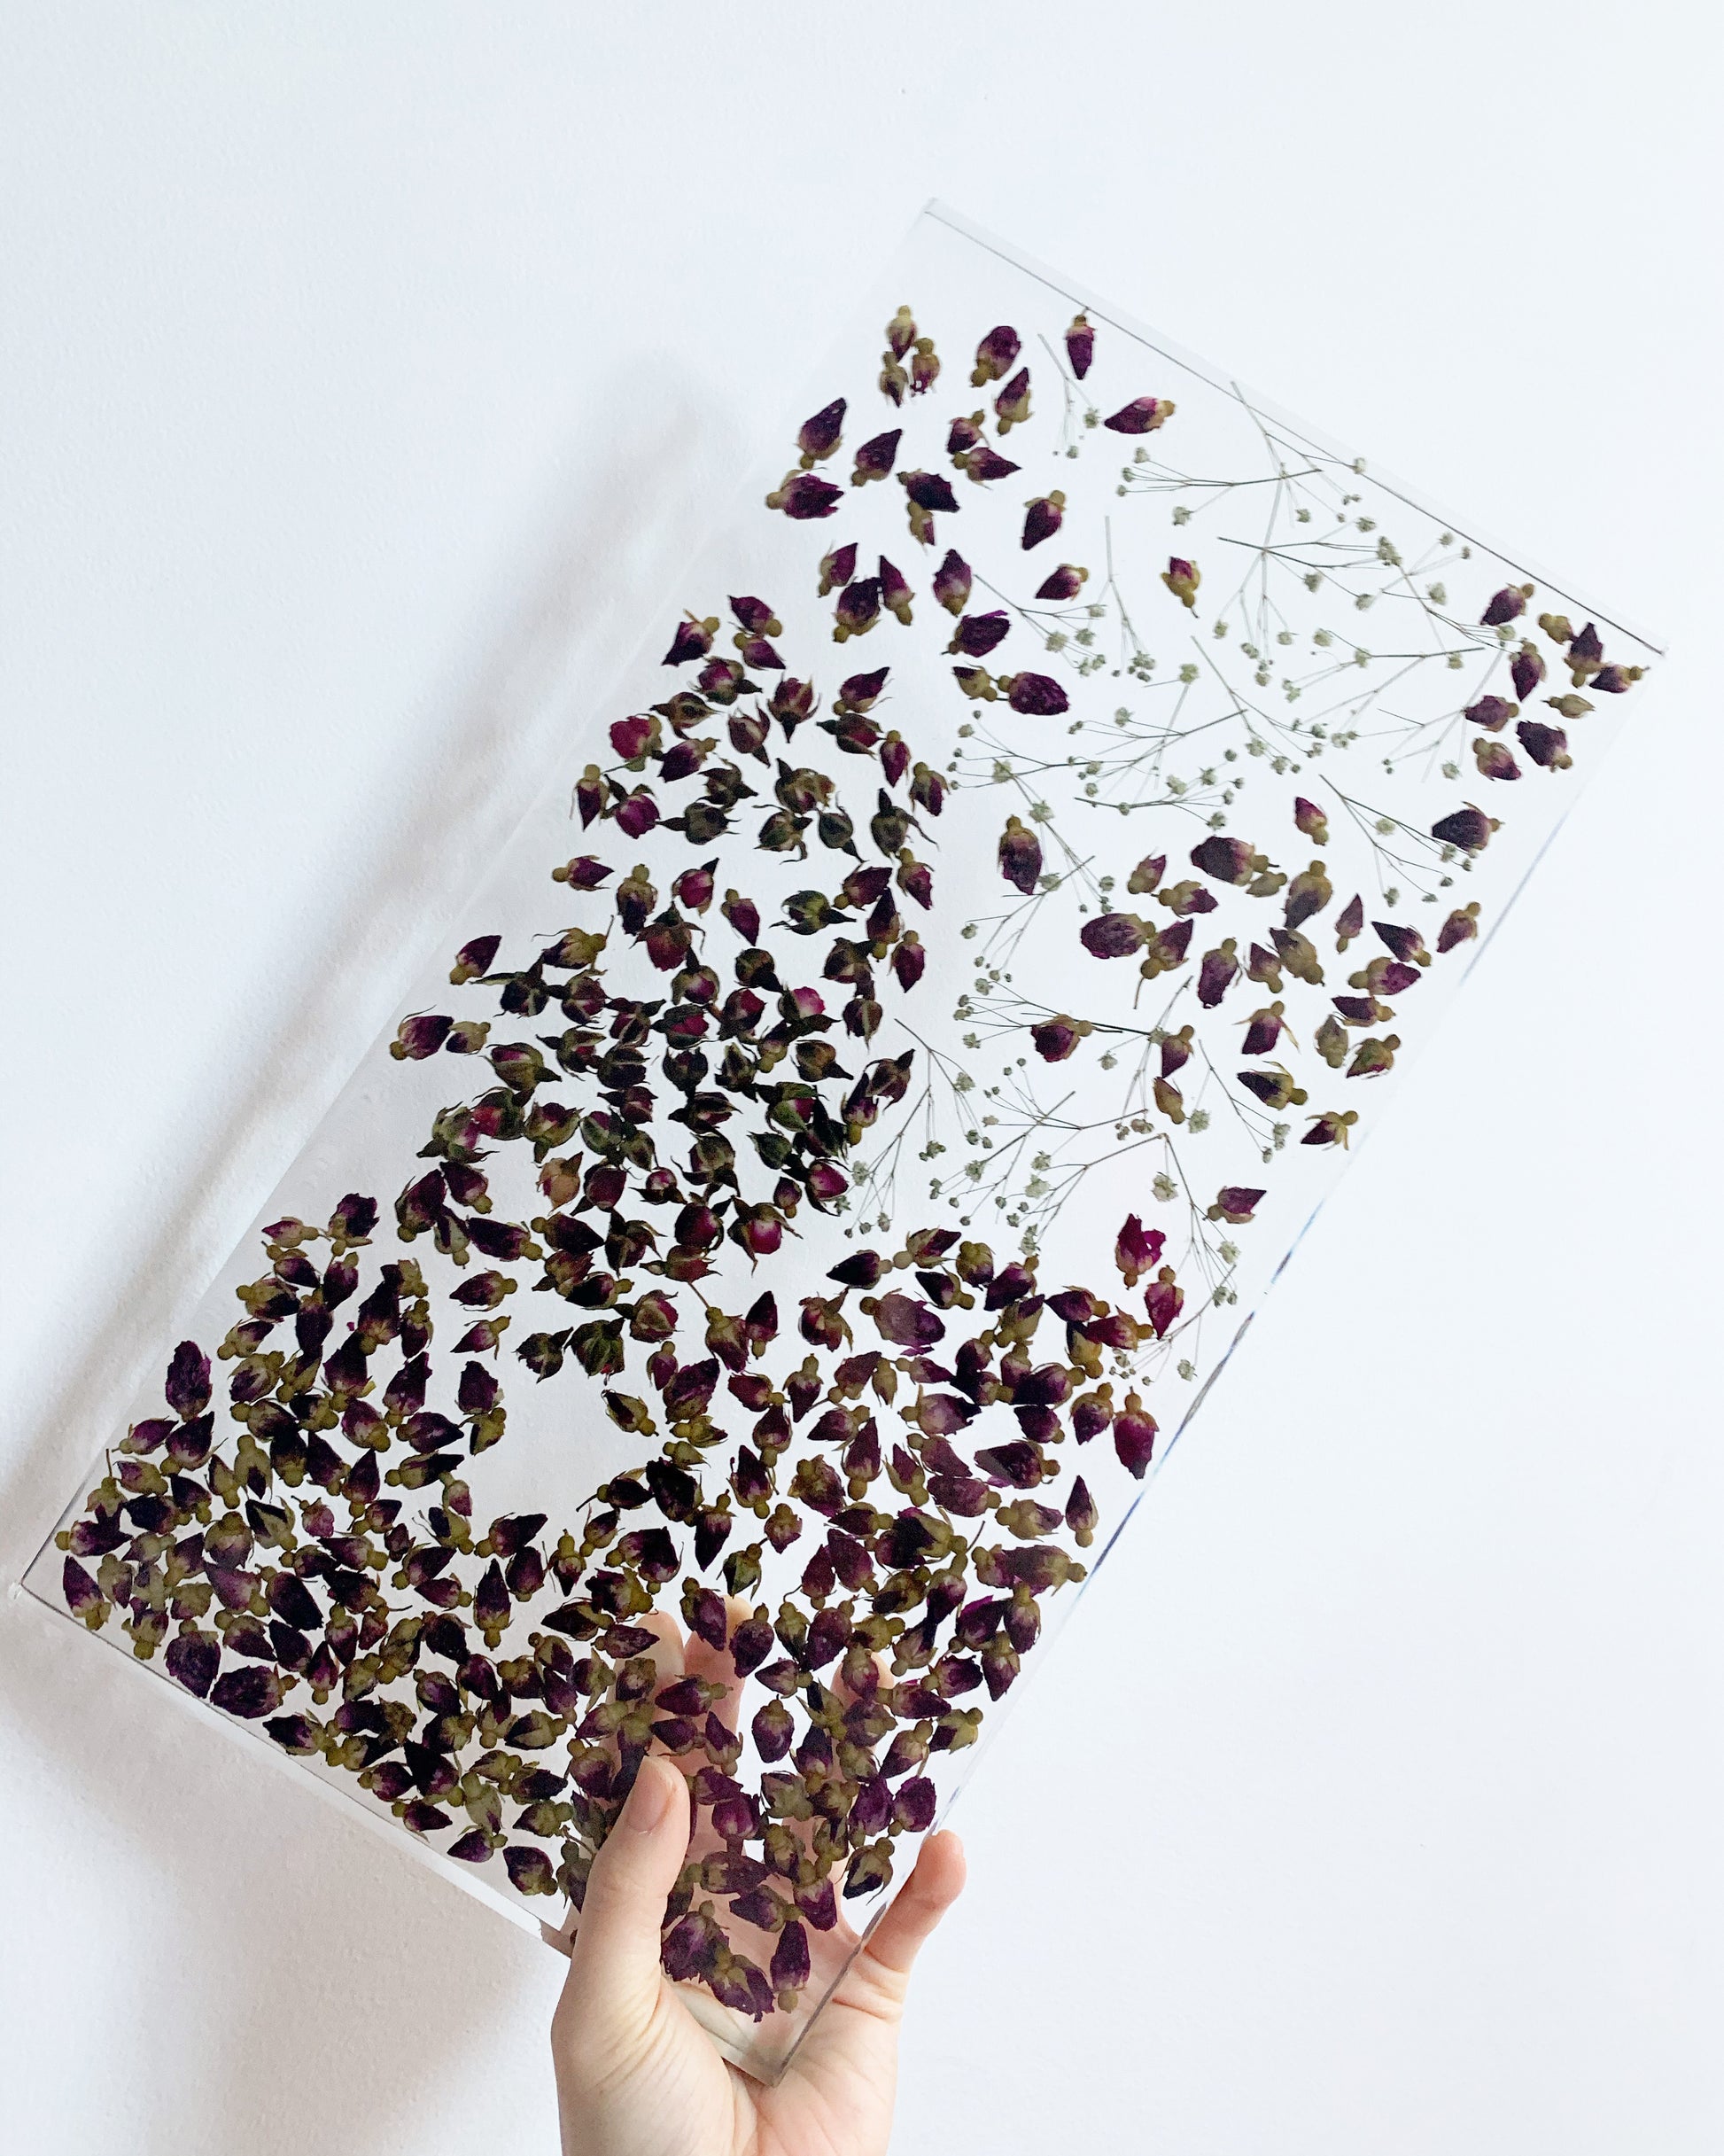  Hundreds of rosebuds sit suspended between sprigs of baby's breath. A durable-yet-whimsical addition to your home decor. Serve cocktails, use as a vanity tray, or simply display as an incredible objet d'art.